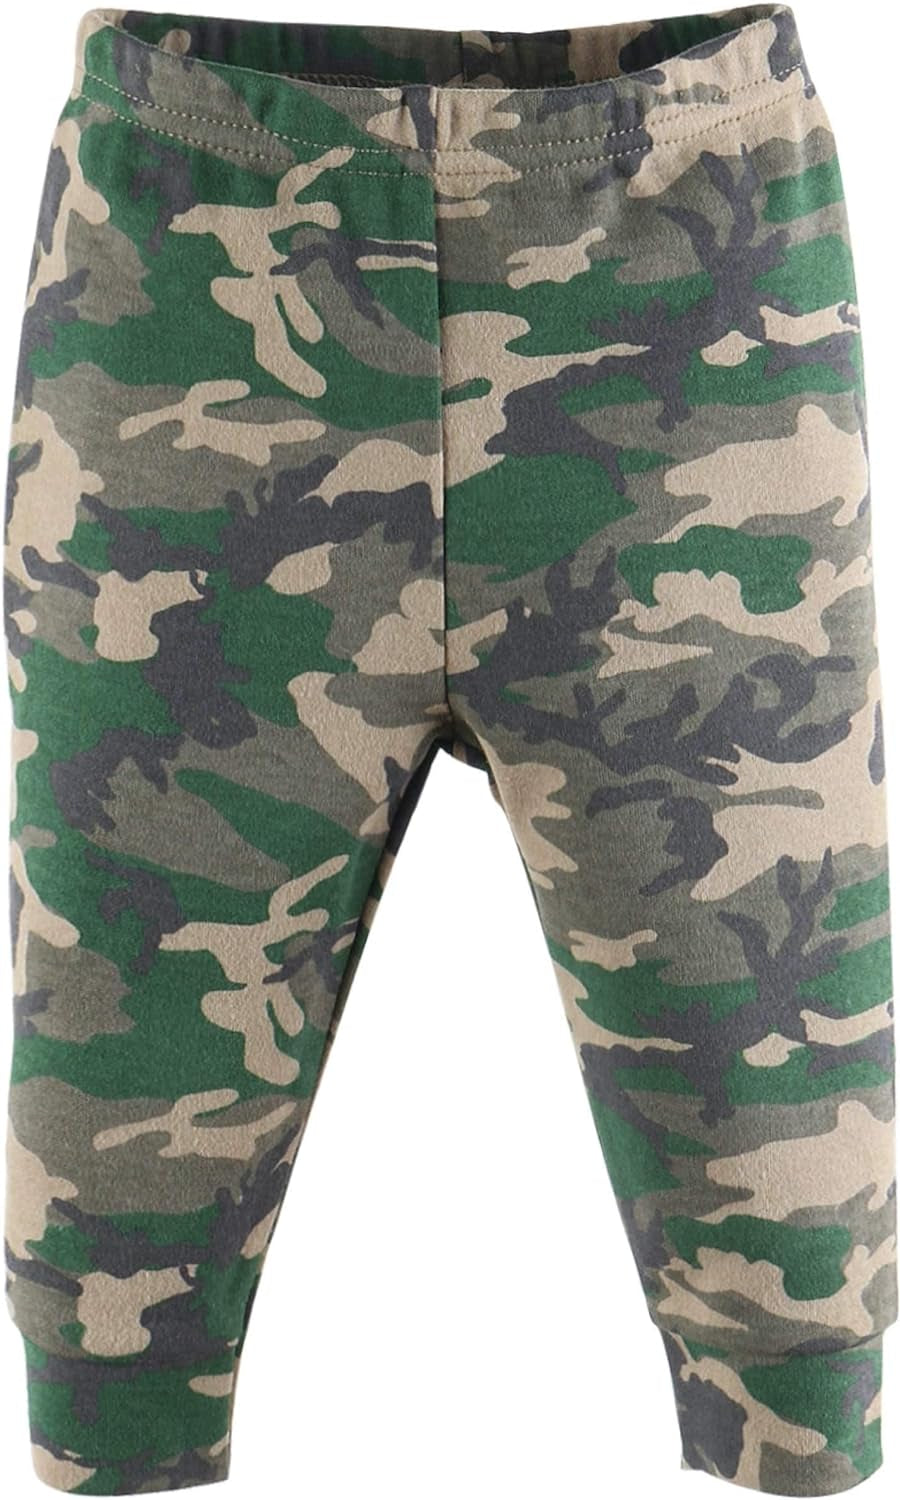 Baby Pants for Boys, 5 Pack Set, Camo Dinosaur, Newborn to 24 Month Sizes